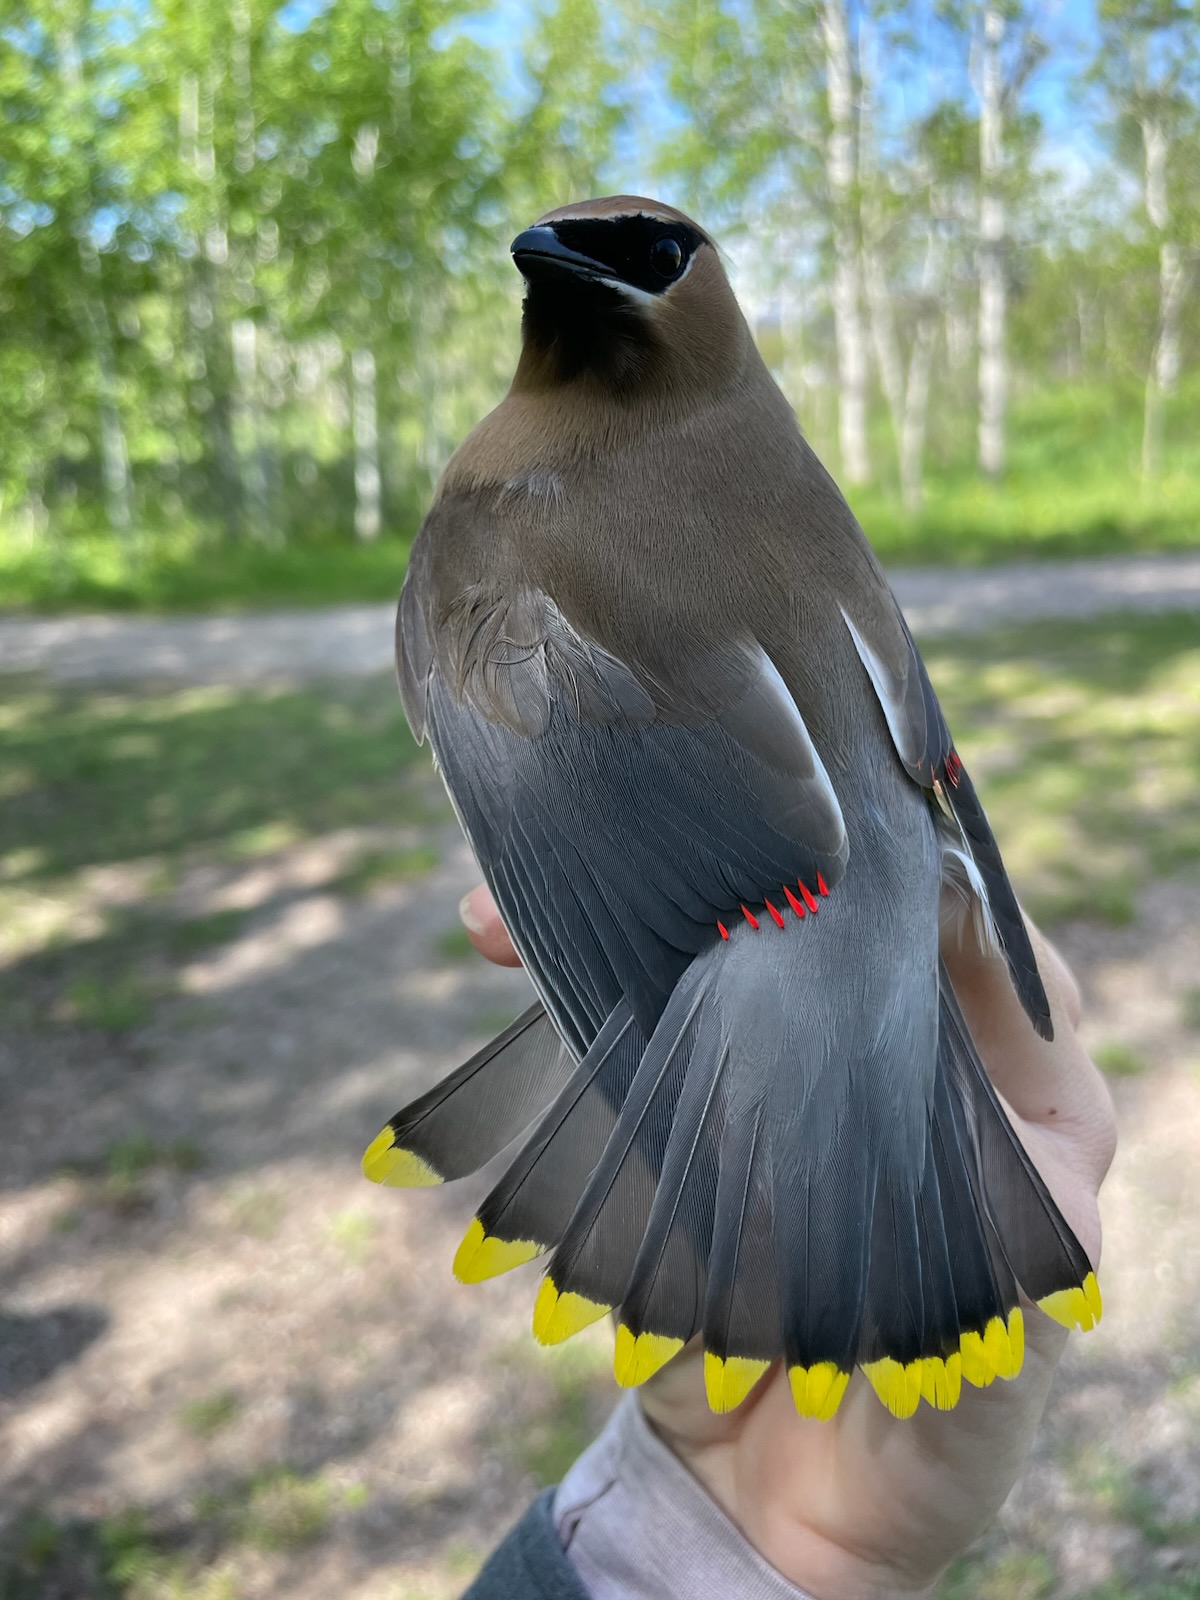 2023 Wildlife and Natural Resources Highlights - A cedar waxwing.